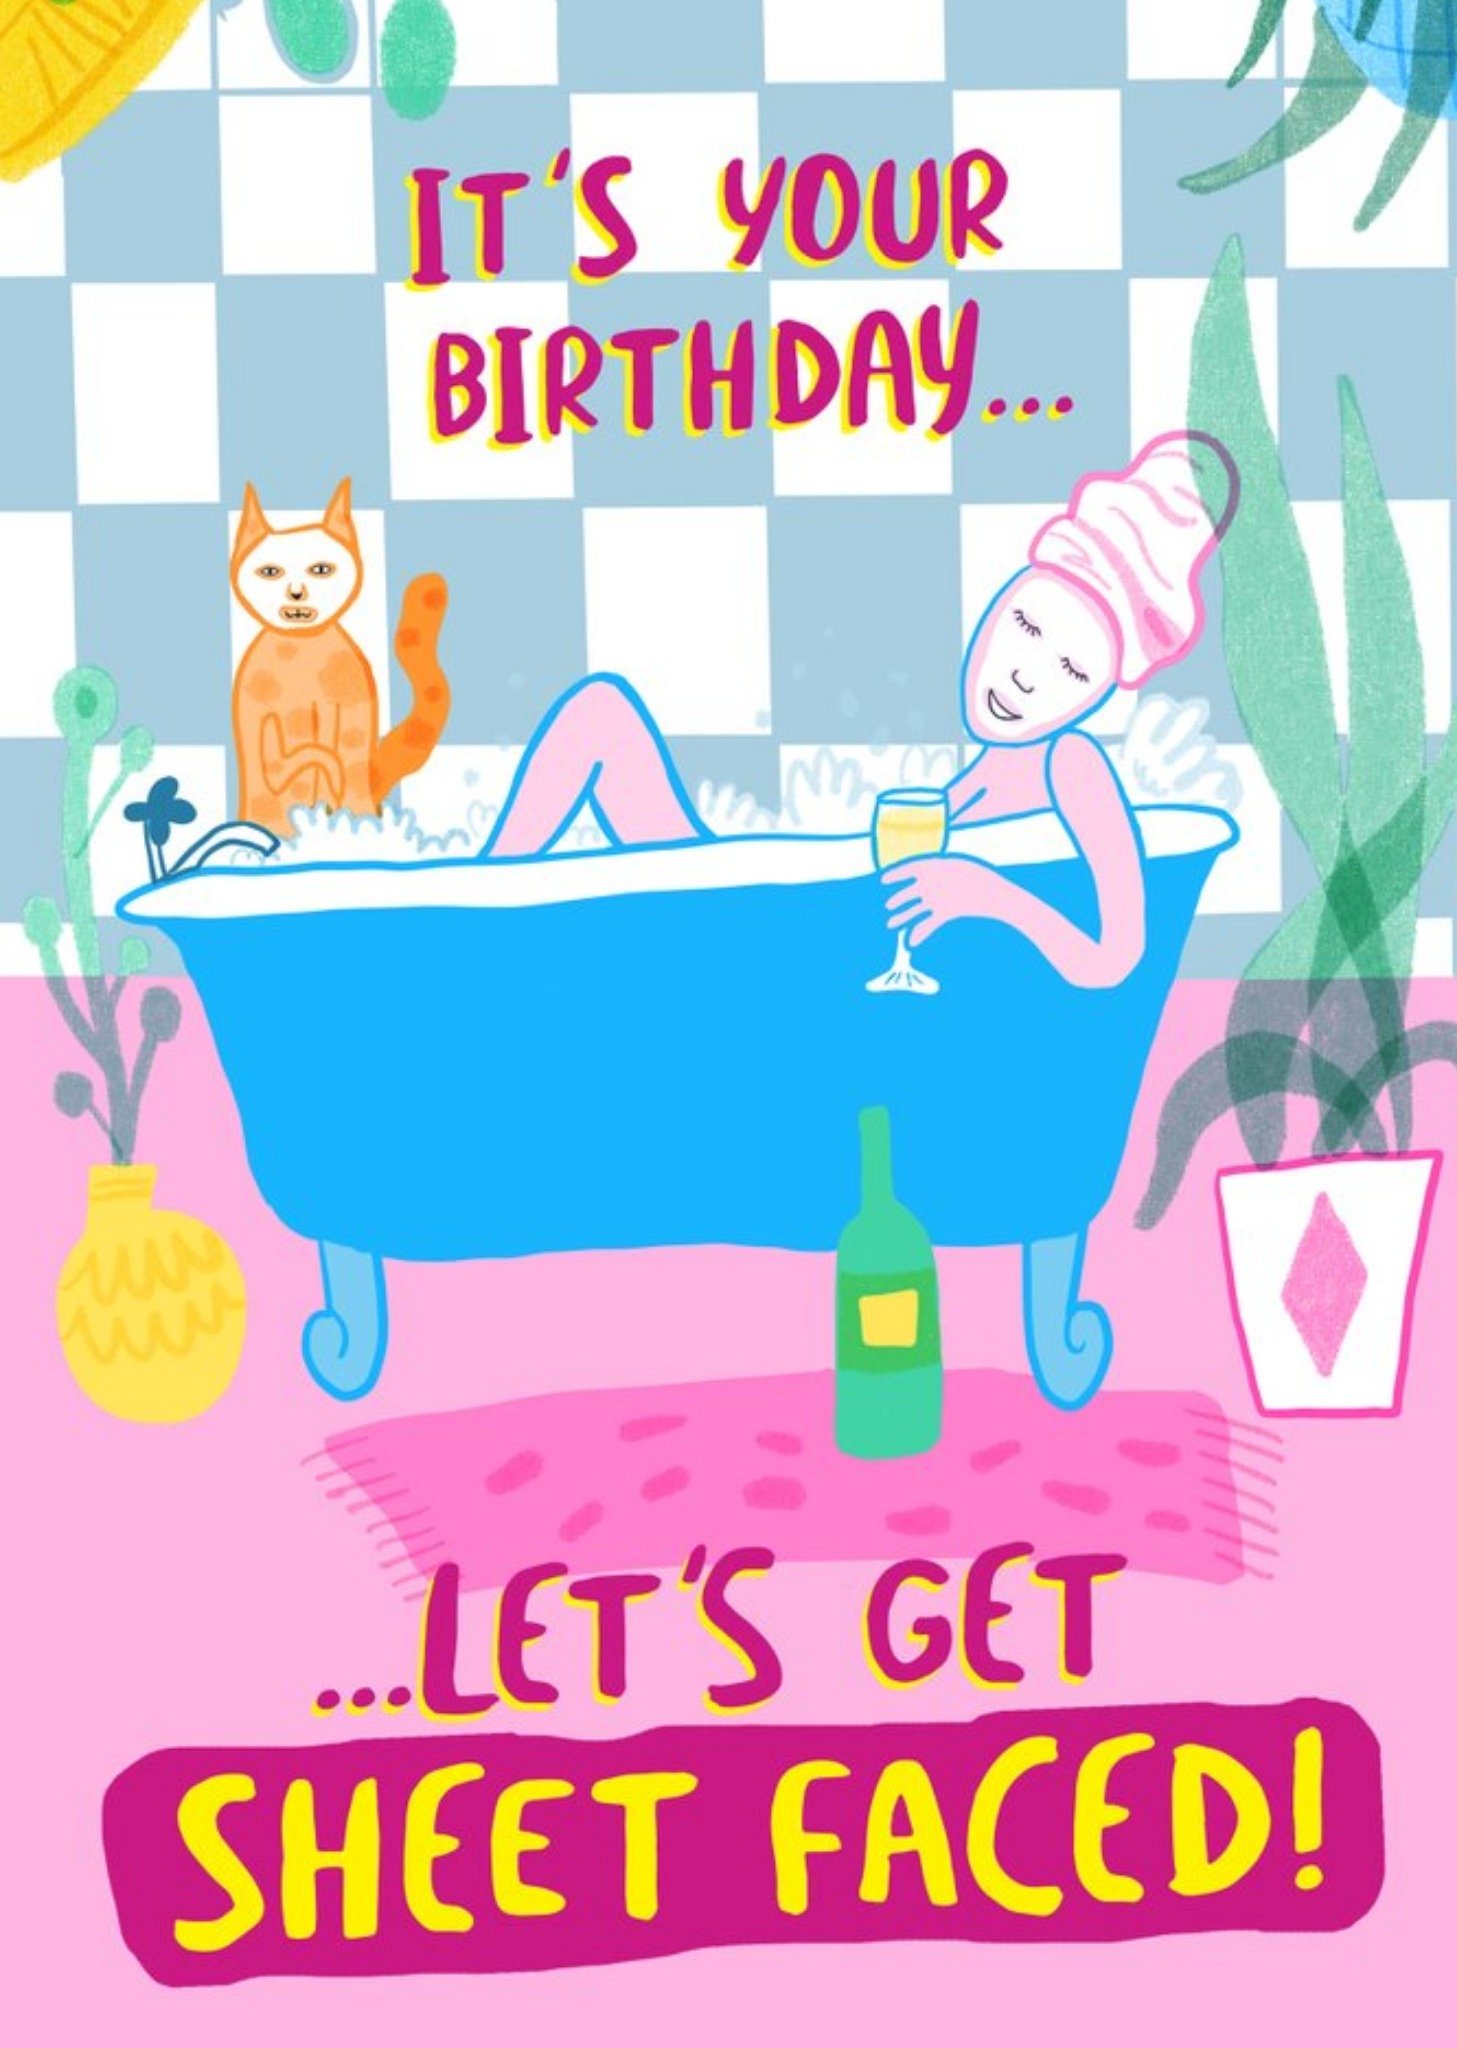 Moonpig Funny Let's Get Sheet Faced Birthday Card, Large